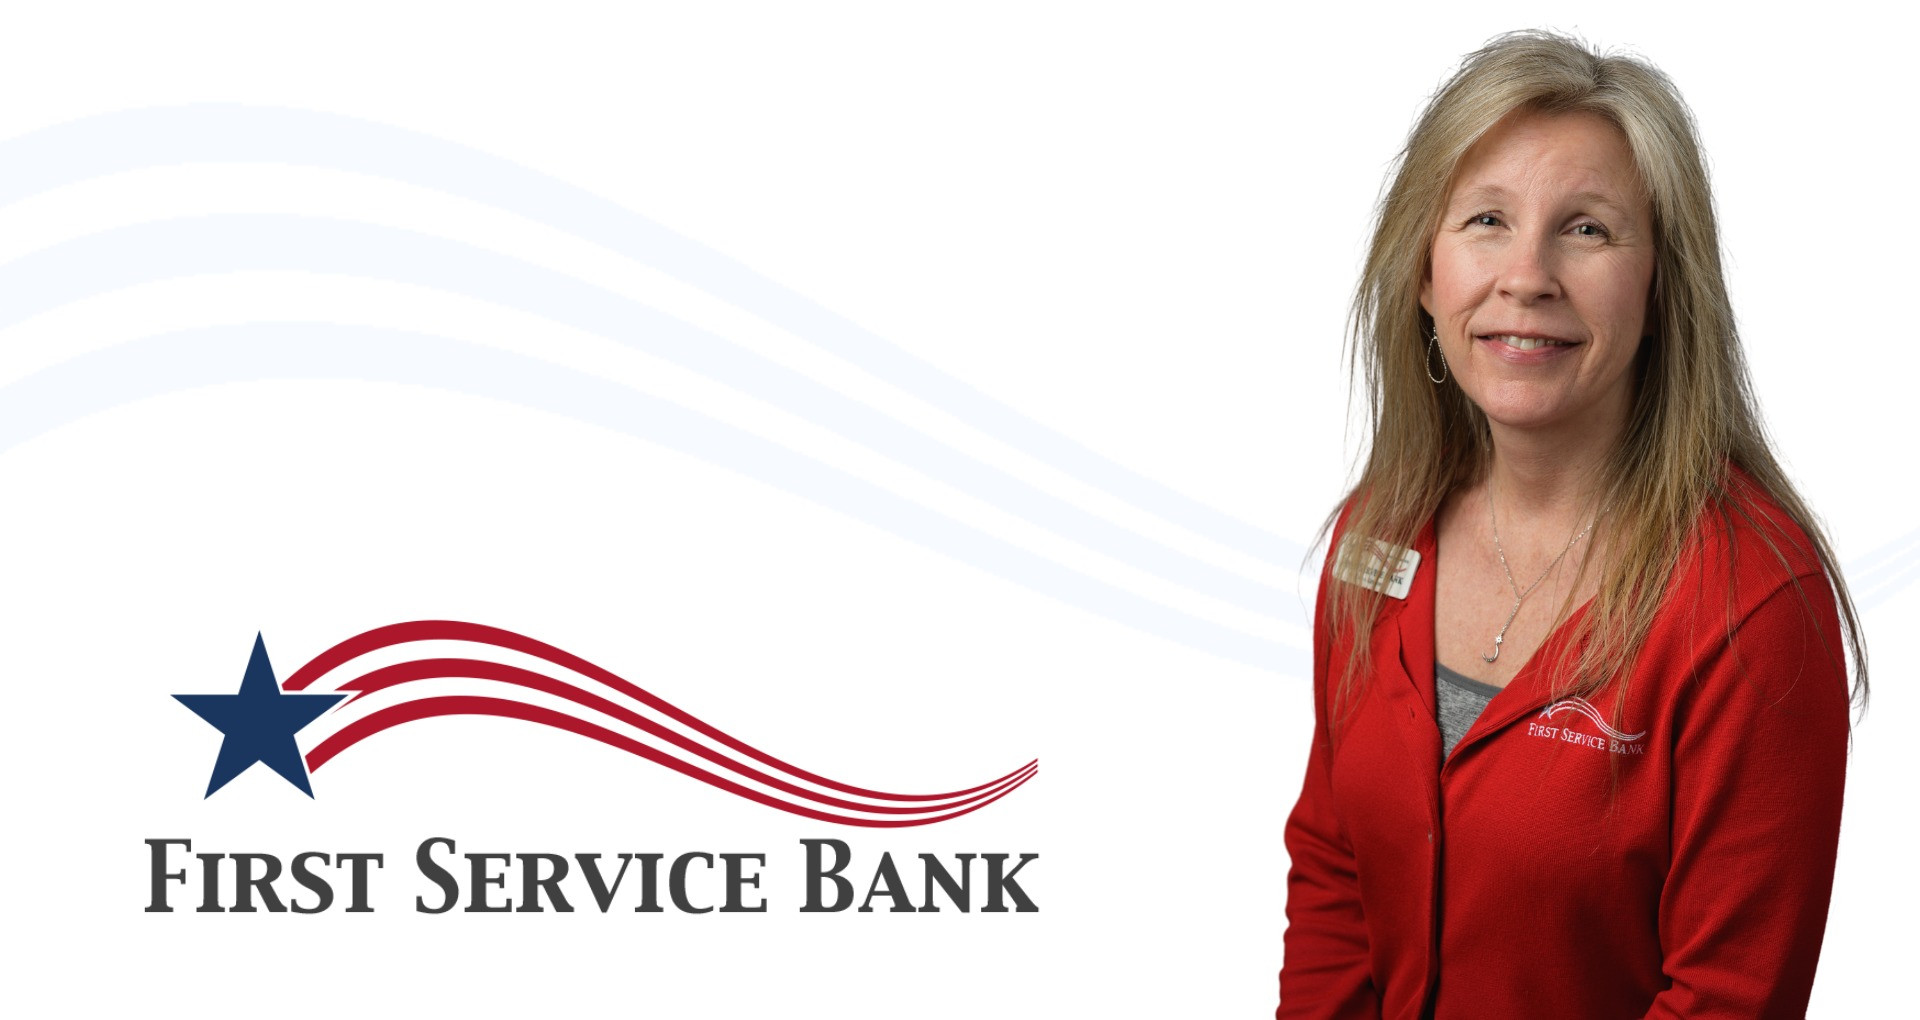 First Service Bank Announces Promotion of Tanya Kennon to Accounting Manager